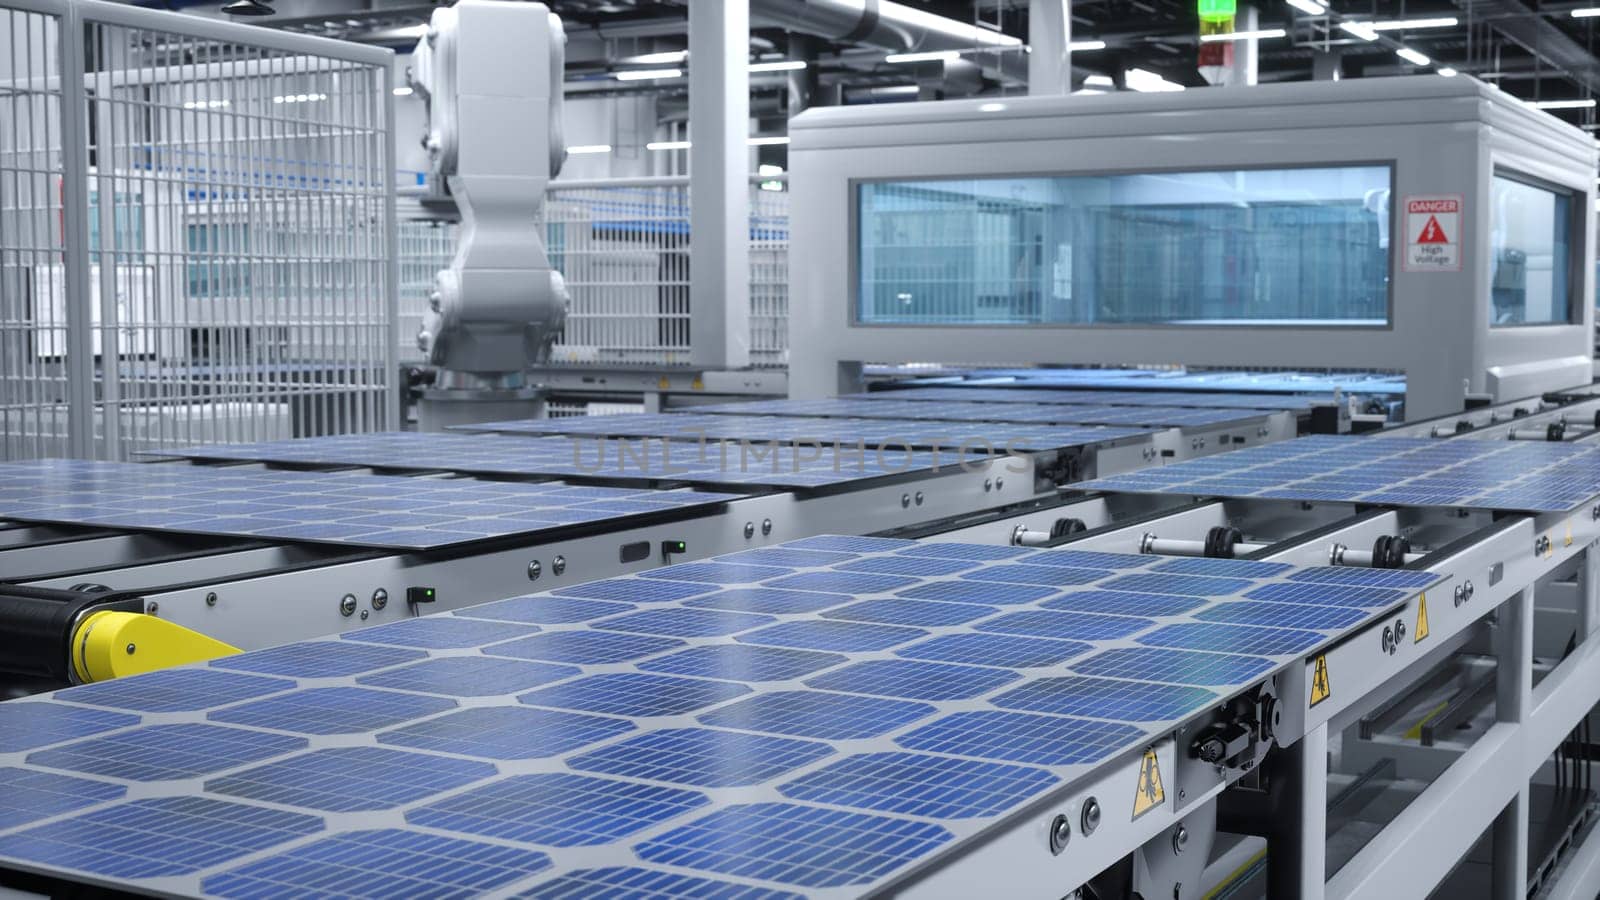 Robot arms in handling photovoltaic modules on large assembly lines, 3D render by DCStudio